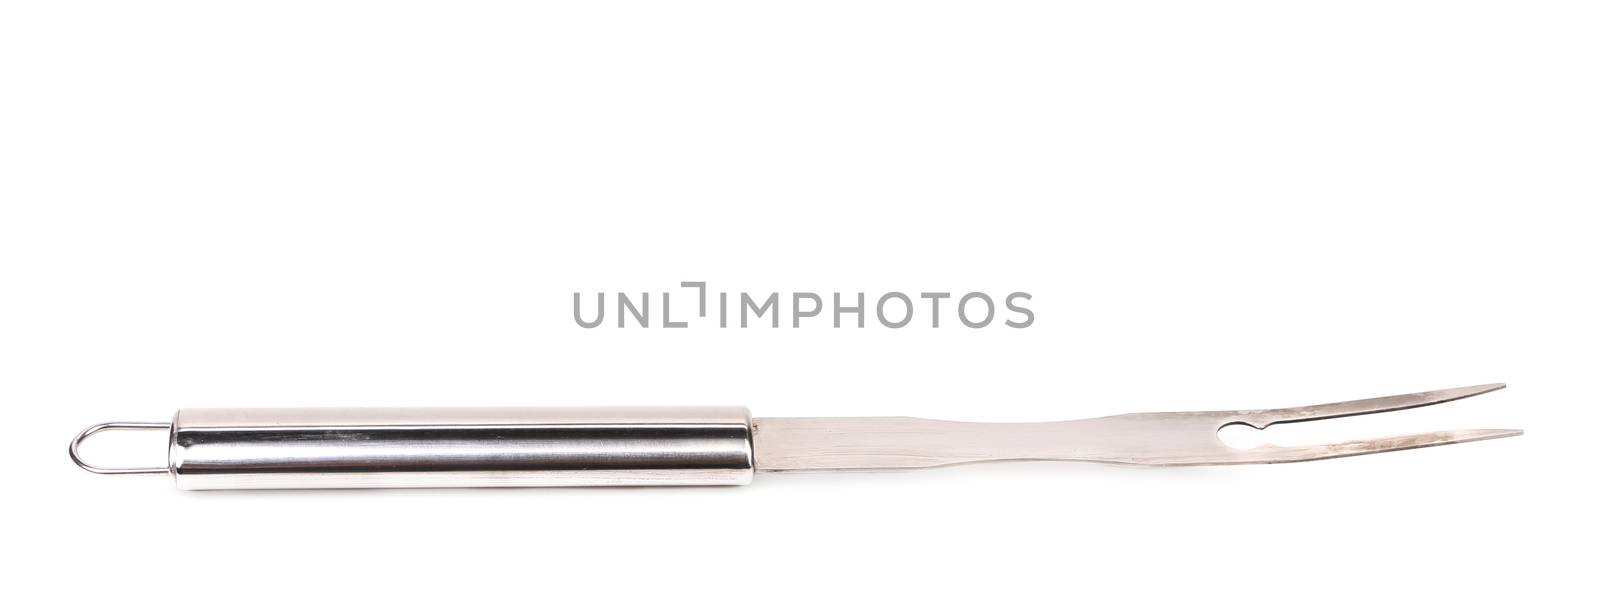 Metallic barbeque fork. Isolated on a white background